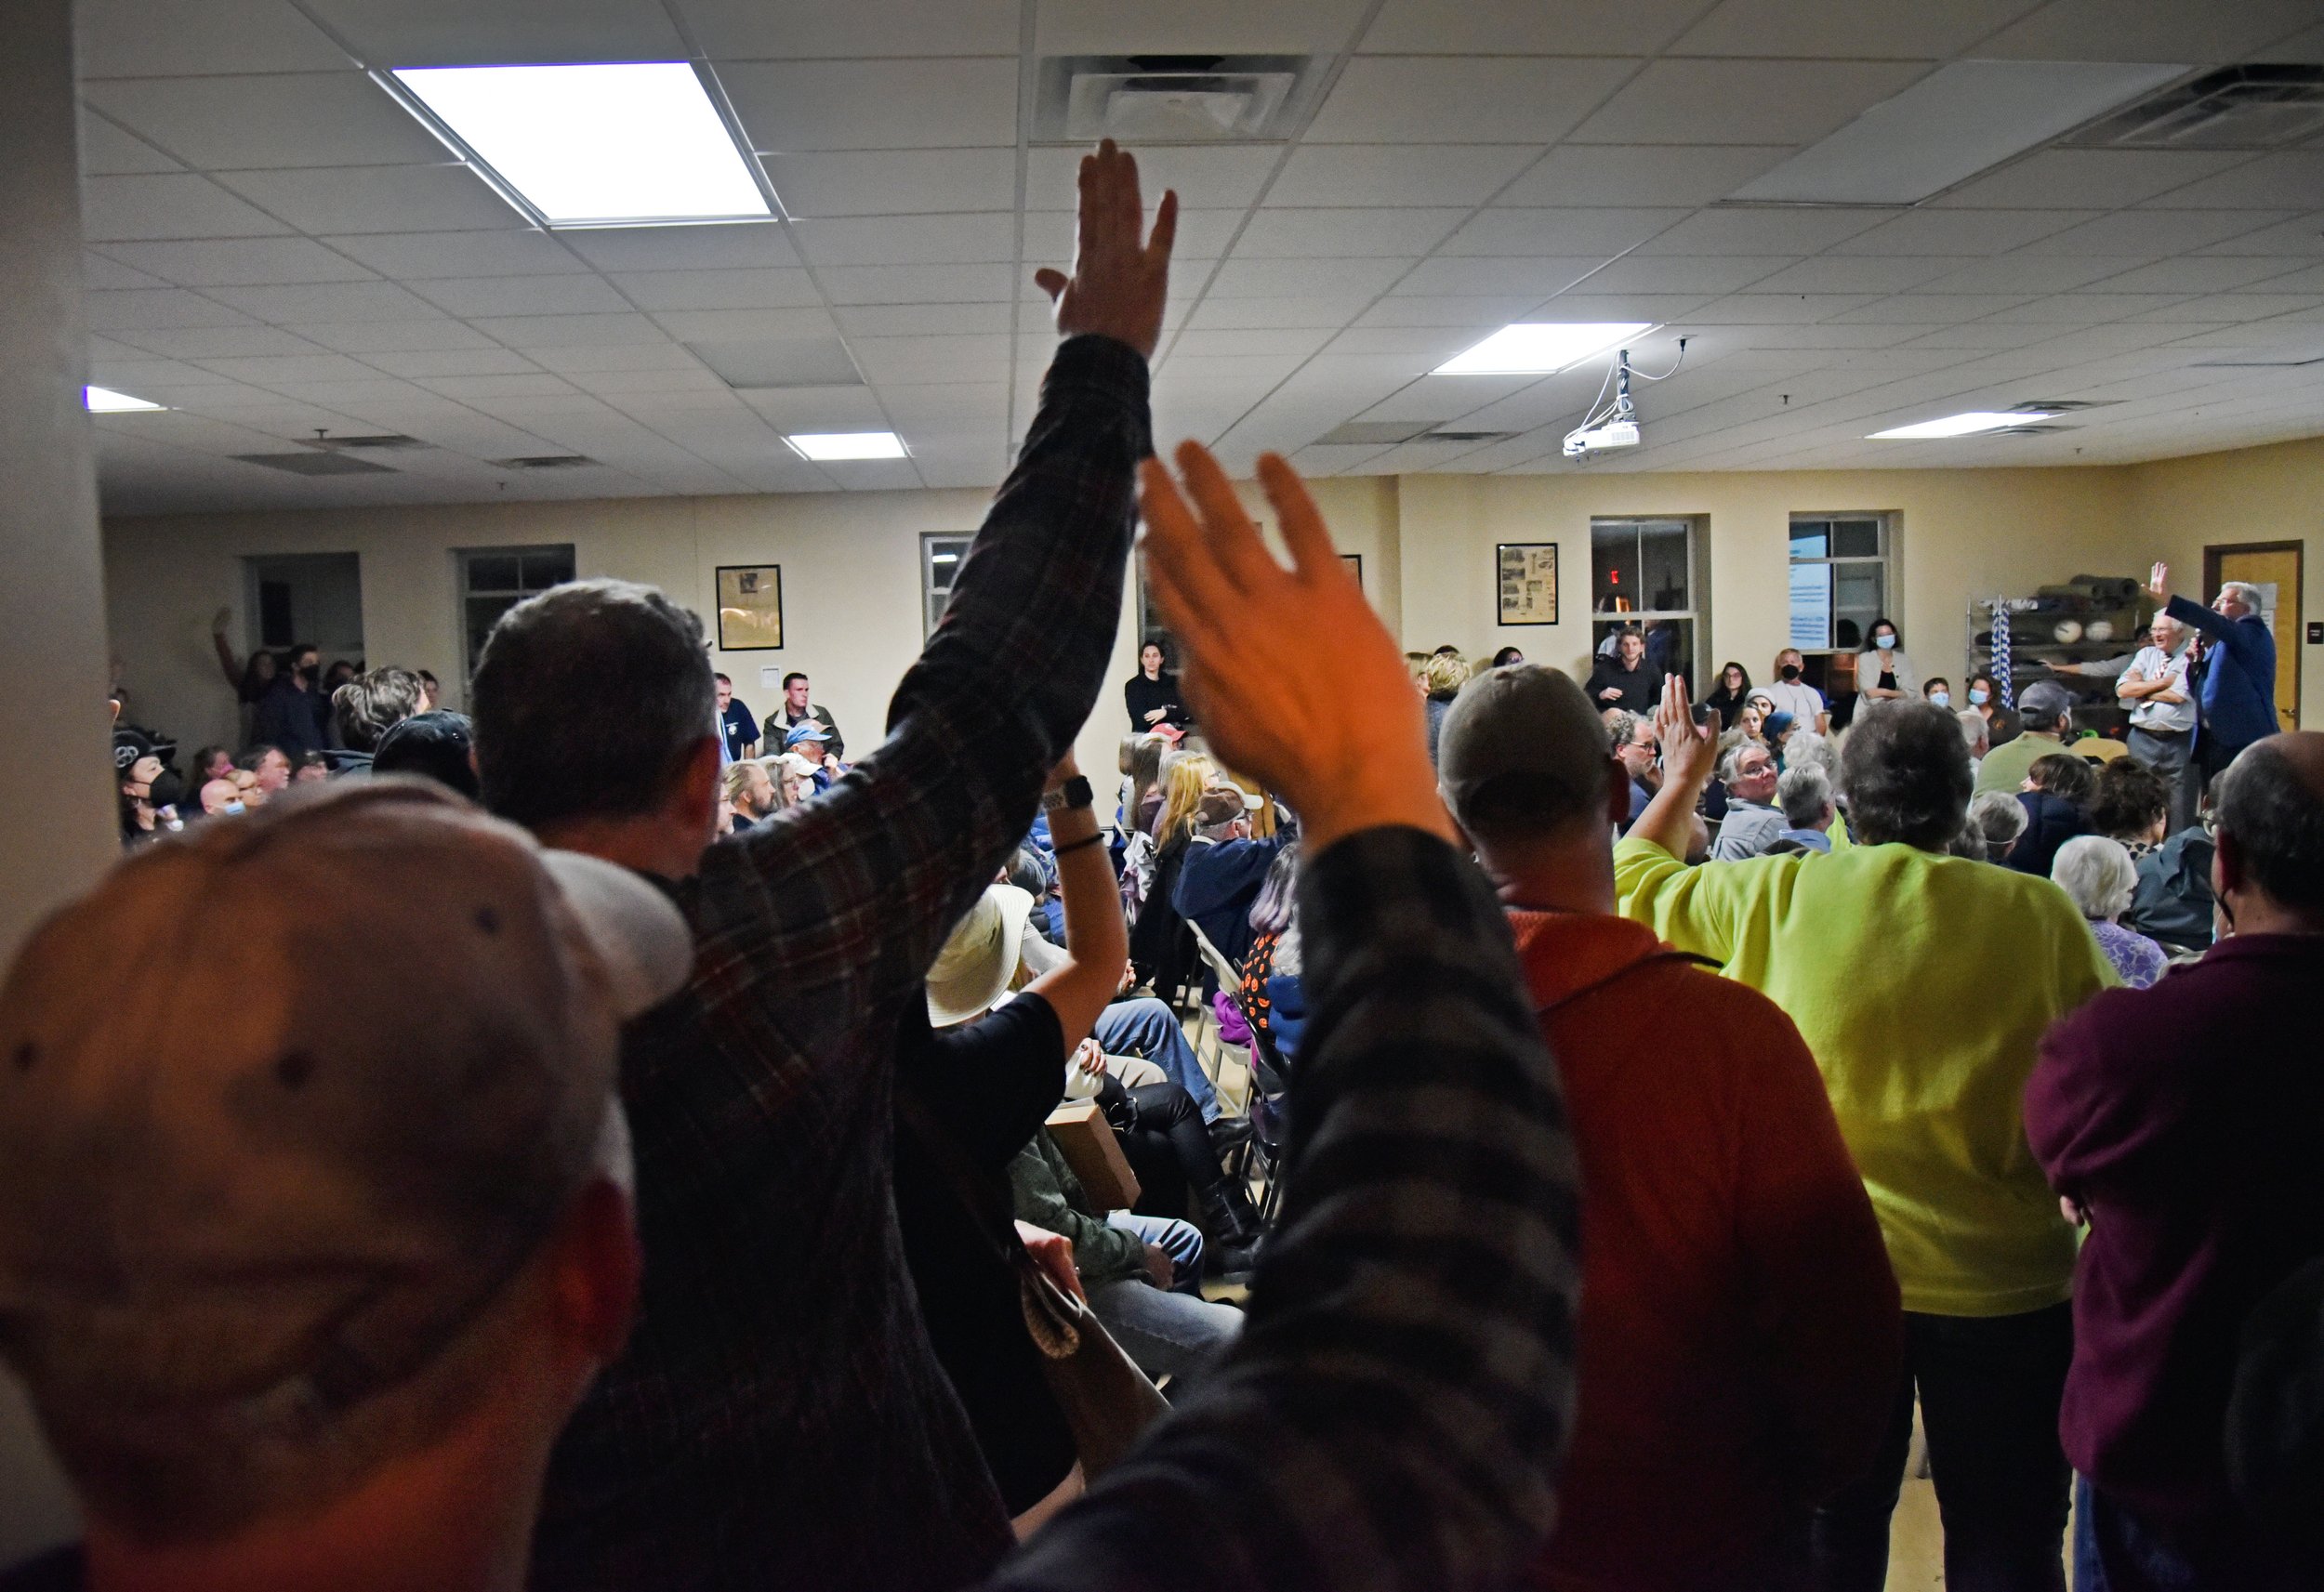   People raise their hands to vote for using paper ballots. Photo by Gordon Miller  